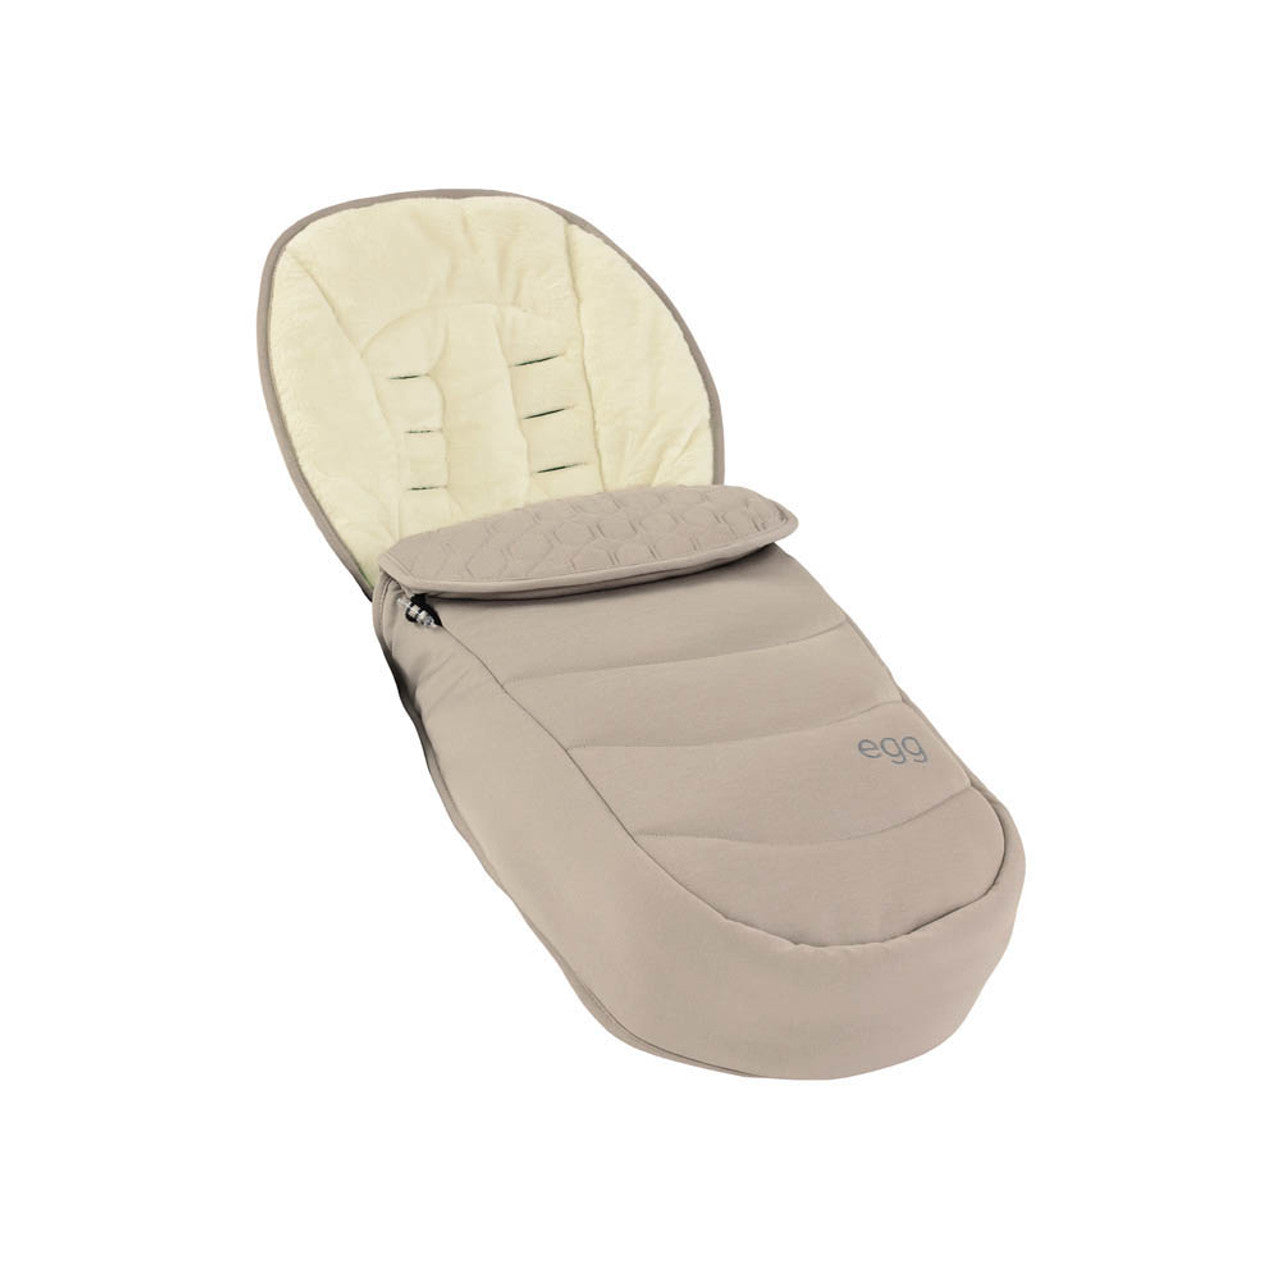 Egg® 3 Footmuff - Feather -  | For Your Little One